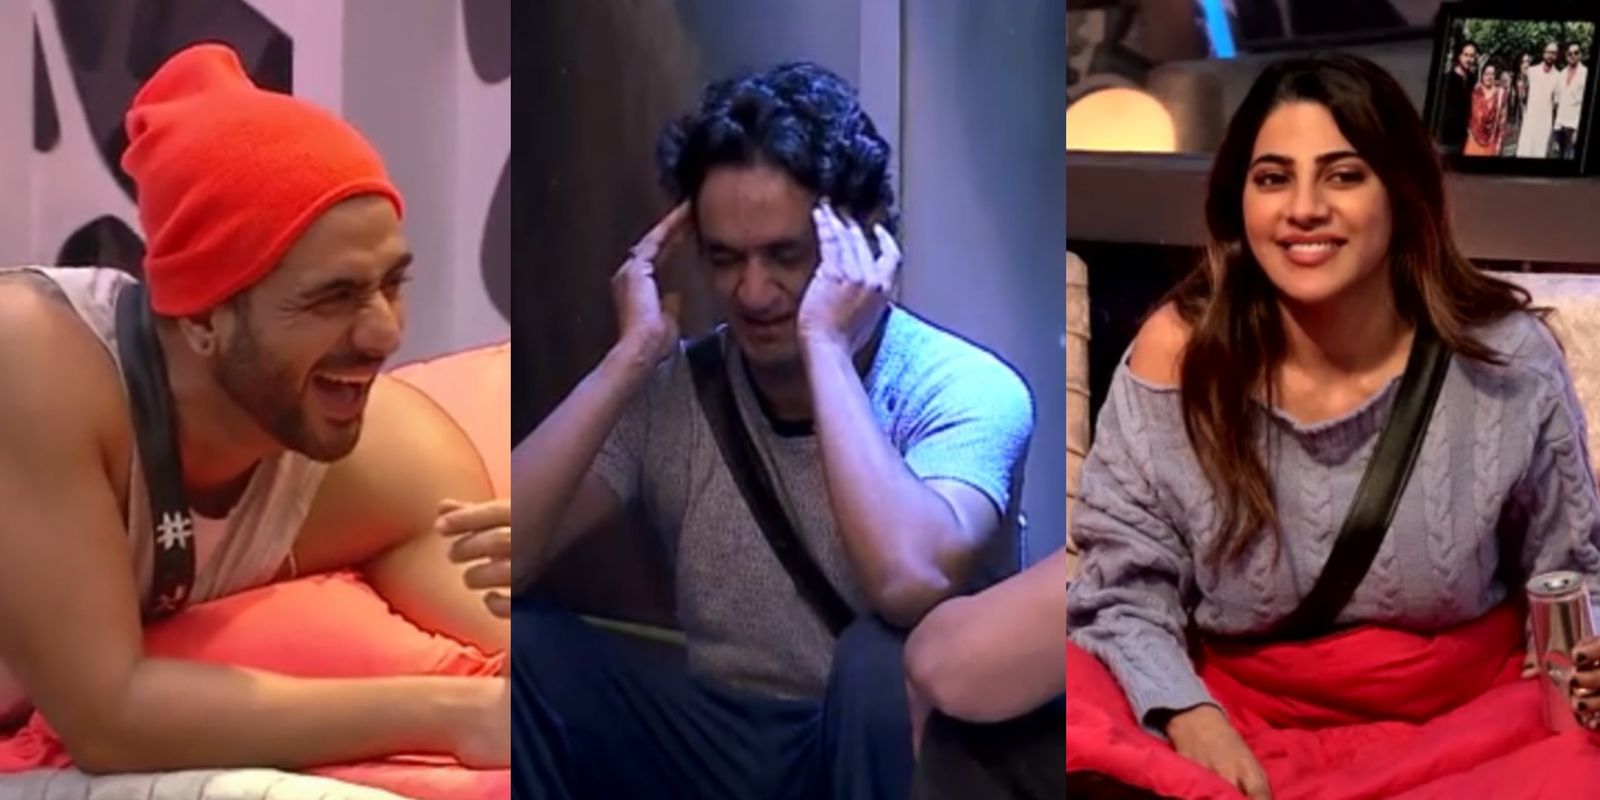 Bigg Boss 14: Netizens Slam Aly, Nikki For Laughing At Vikas Gupta While He Cried Out In Pain & Left The Show